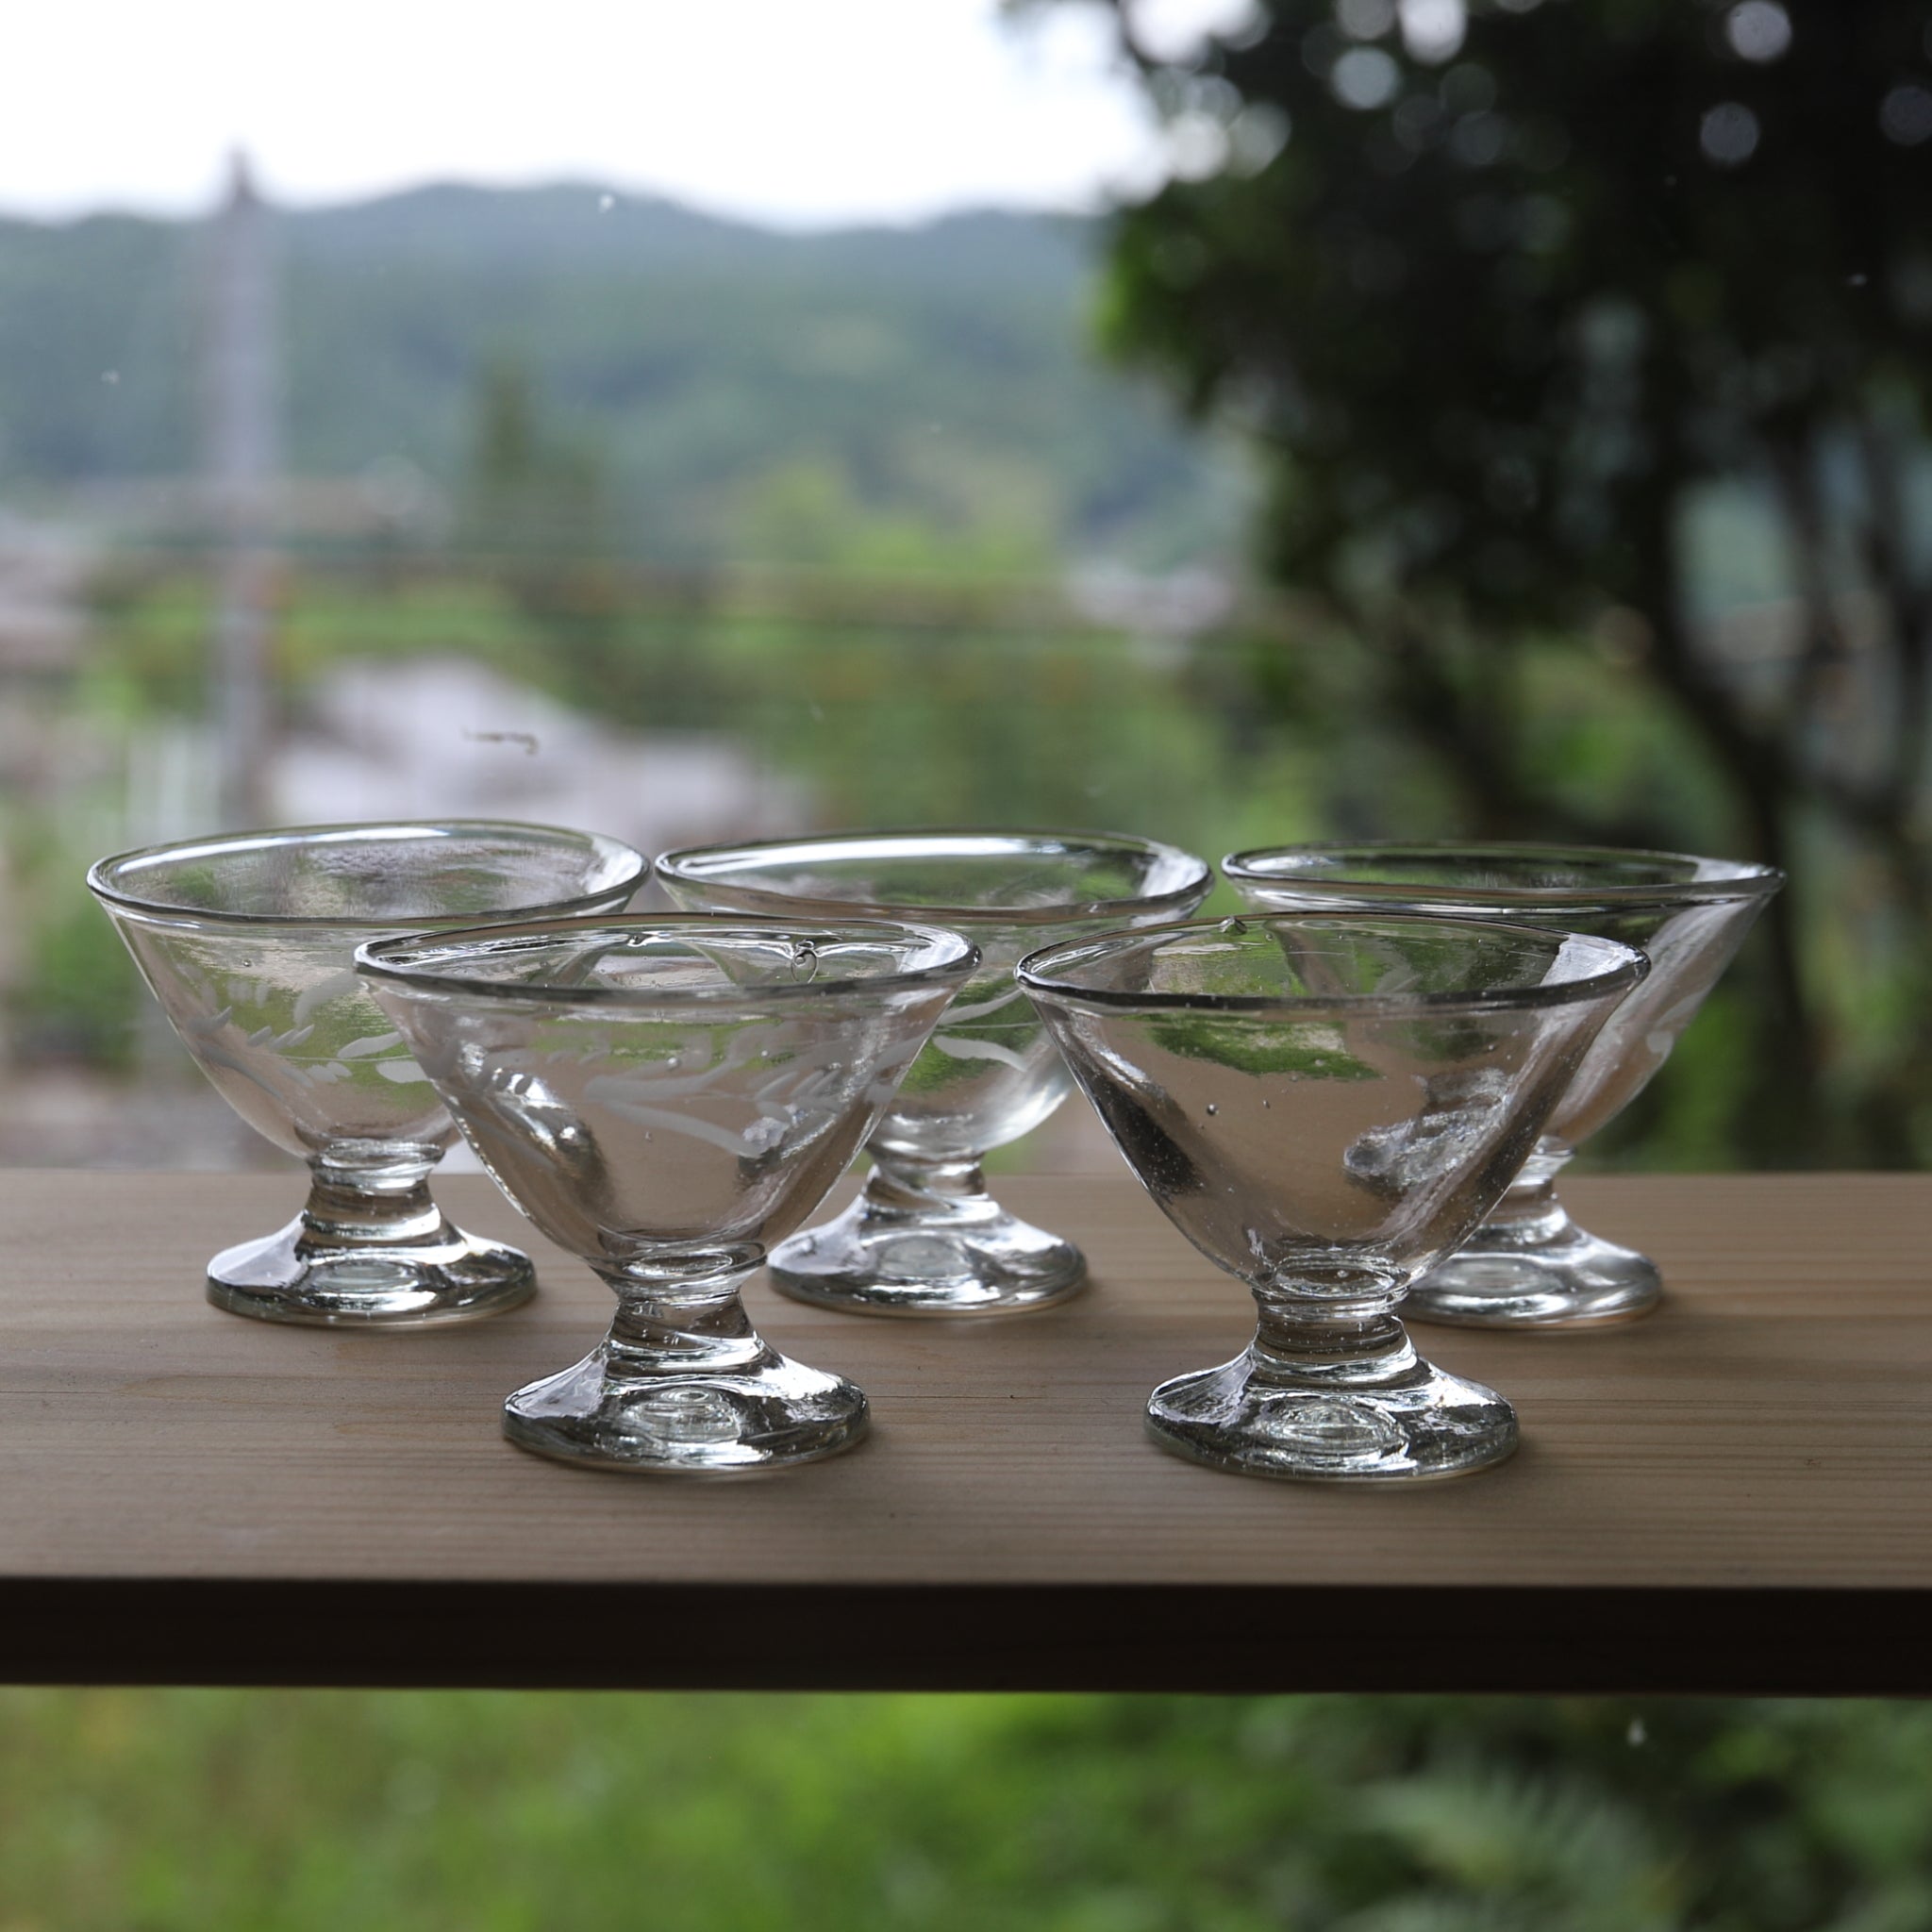 Antique Other Glass Products アンティーク その他 硝子製品 商品一覧